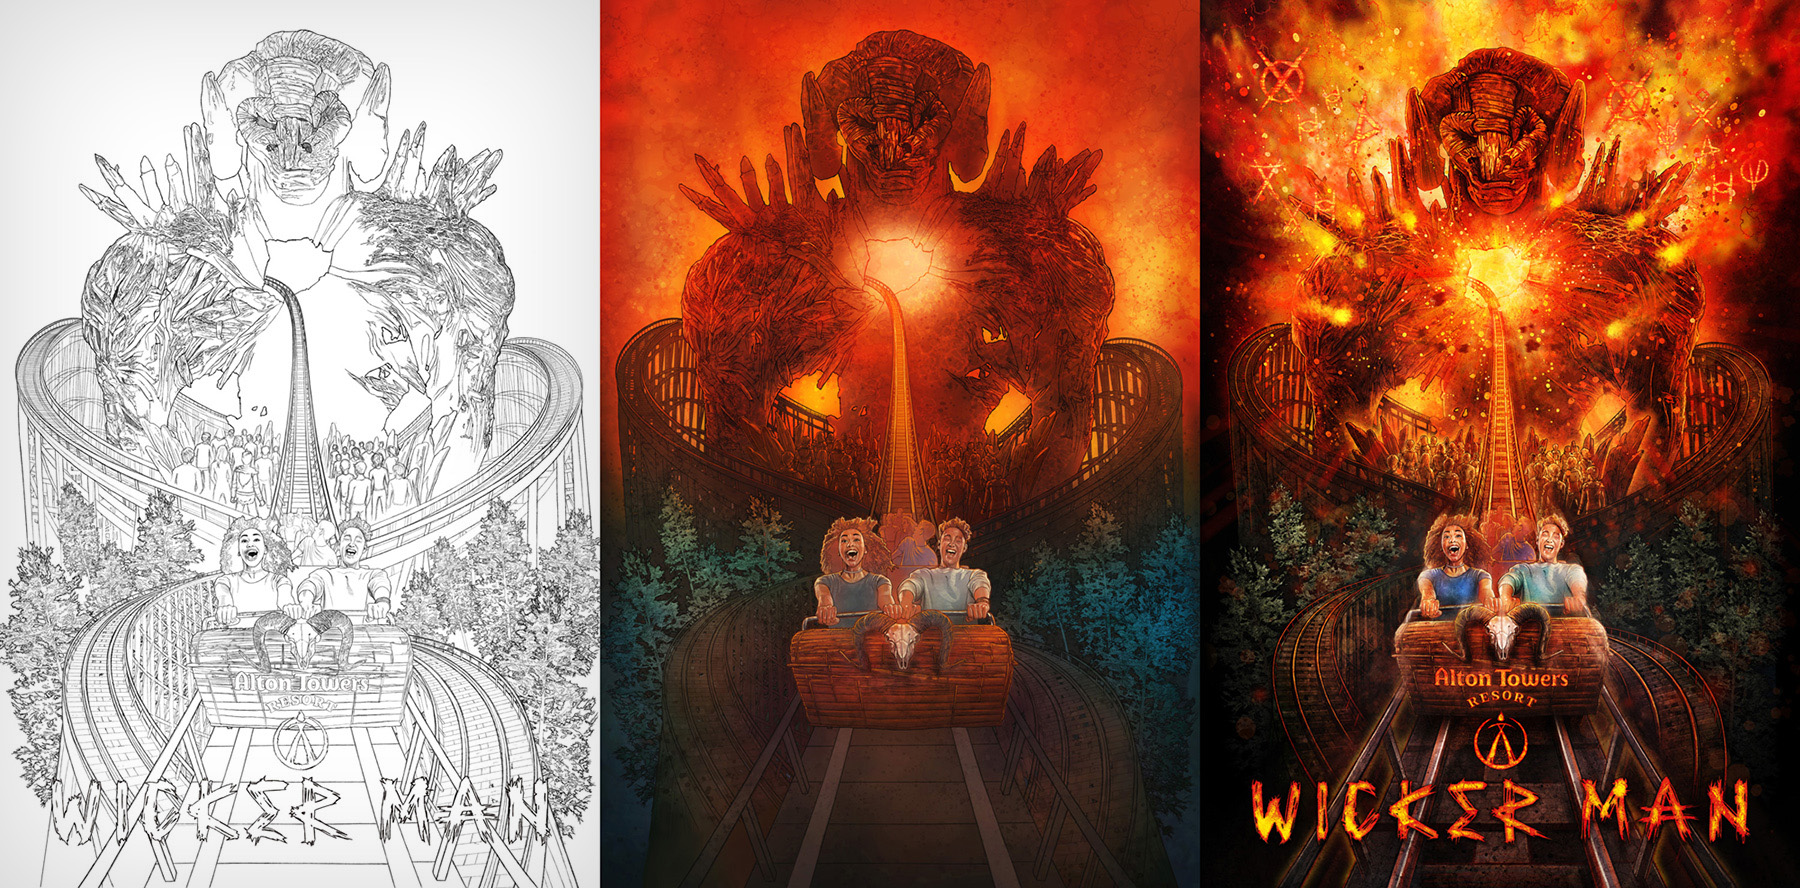 Wicker Man - Alton Towers Theme Park Poster - Stages